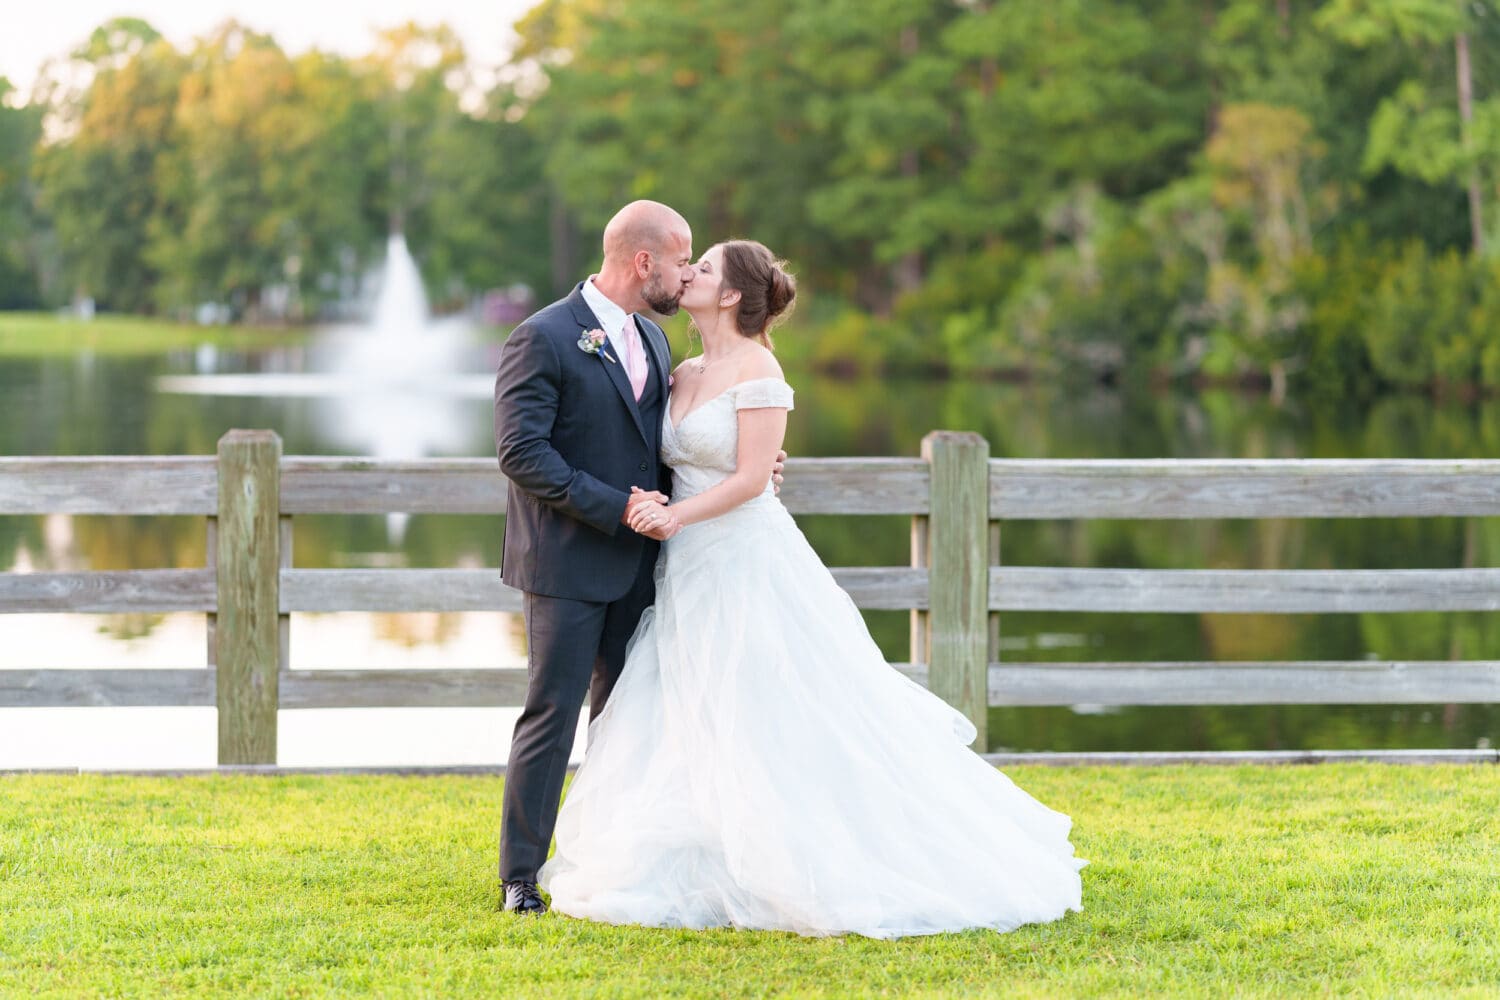 Sunset portraits with bride and groom in front of the lake and fountain - The Pavilion at Pepper Plantation